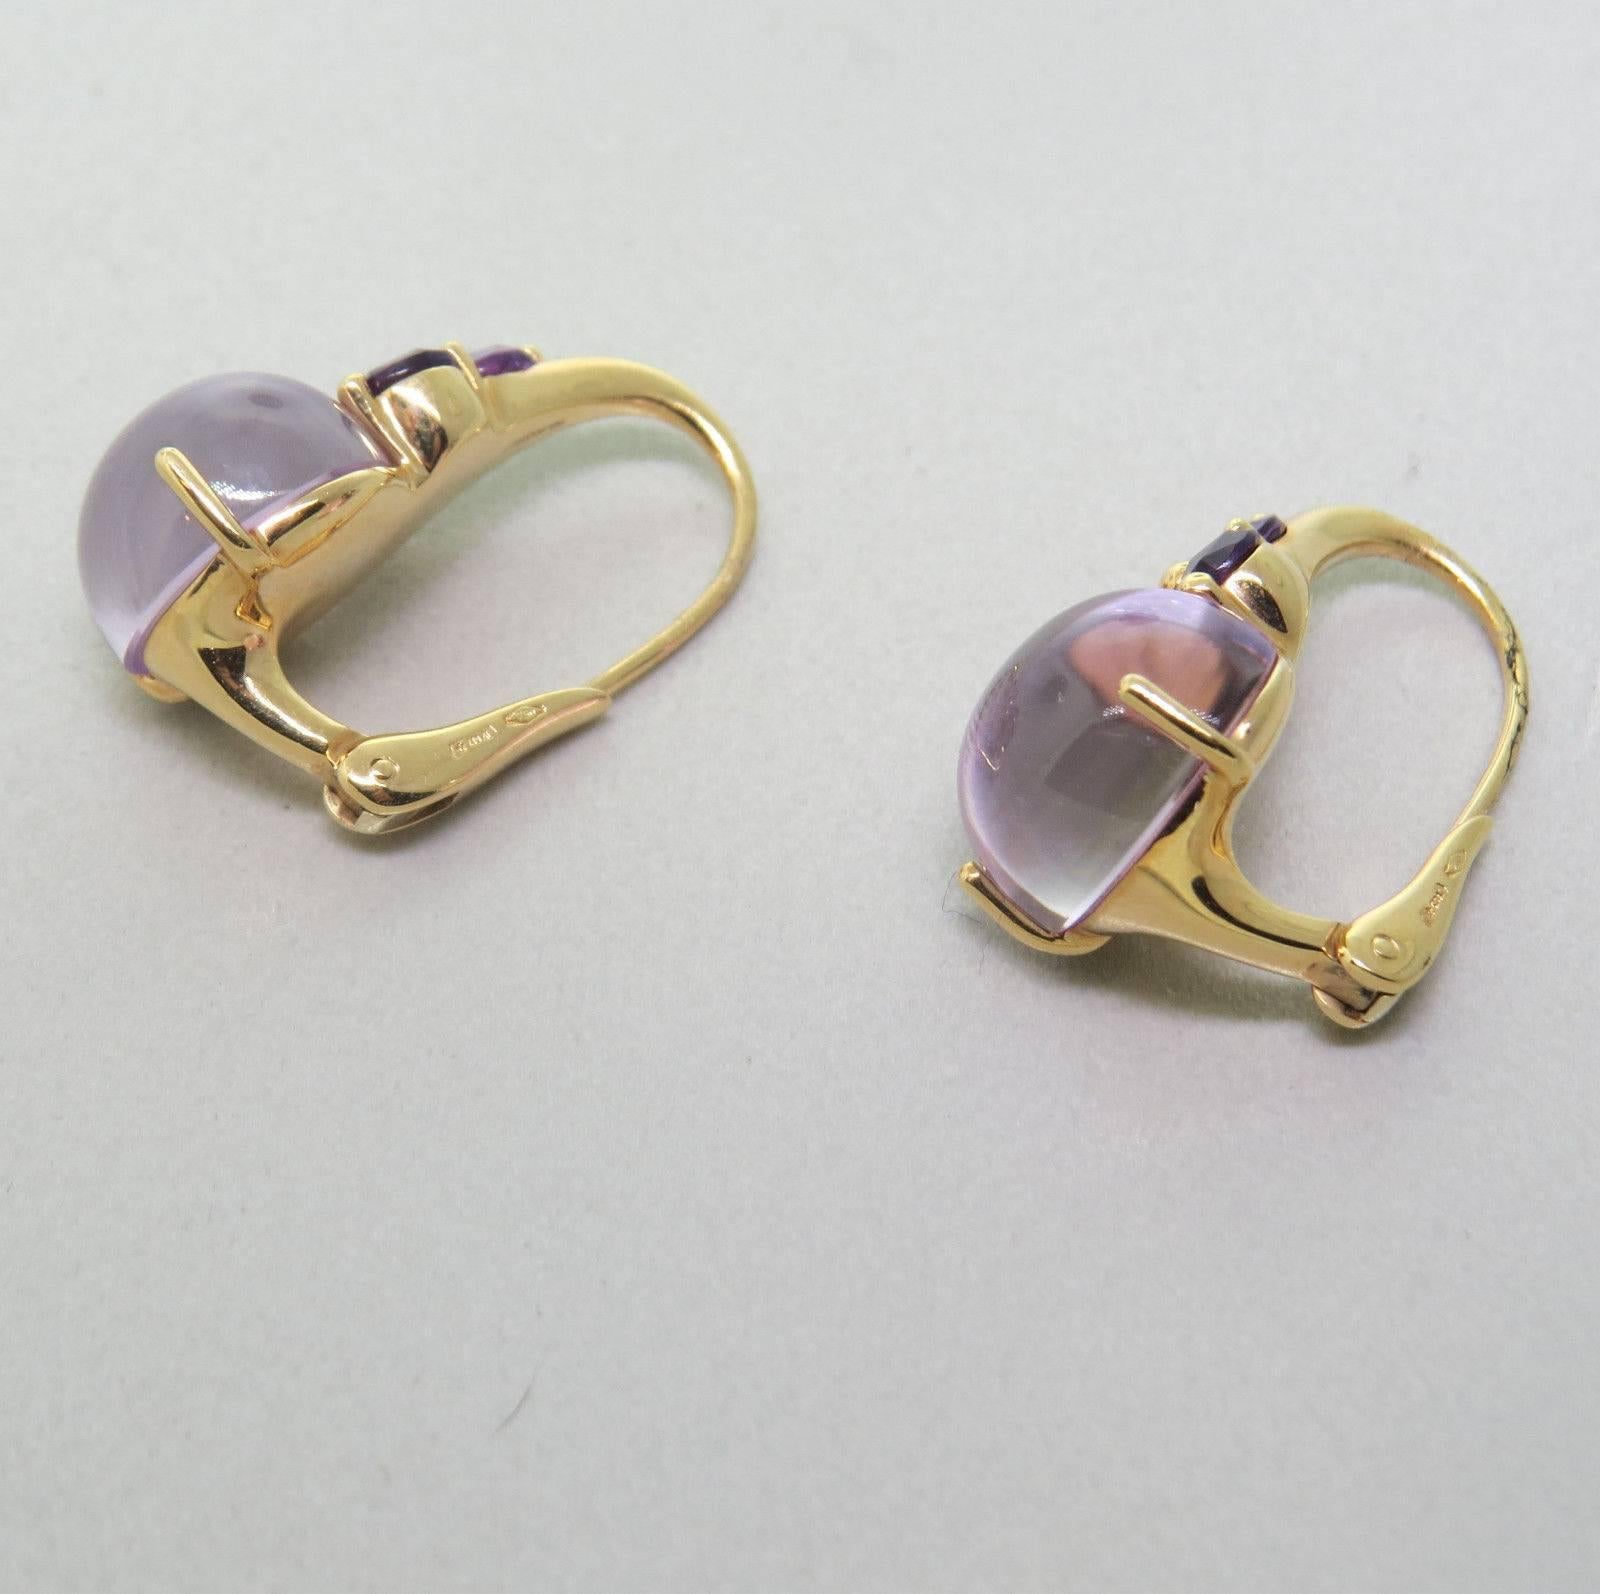 A pair of 18k rose gold Pomellato earrings, crafted by Luna collection, set with rose quartz and amethysts. Earrings are 26mm x 12.7mm . Weight - 13.7 grams 